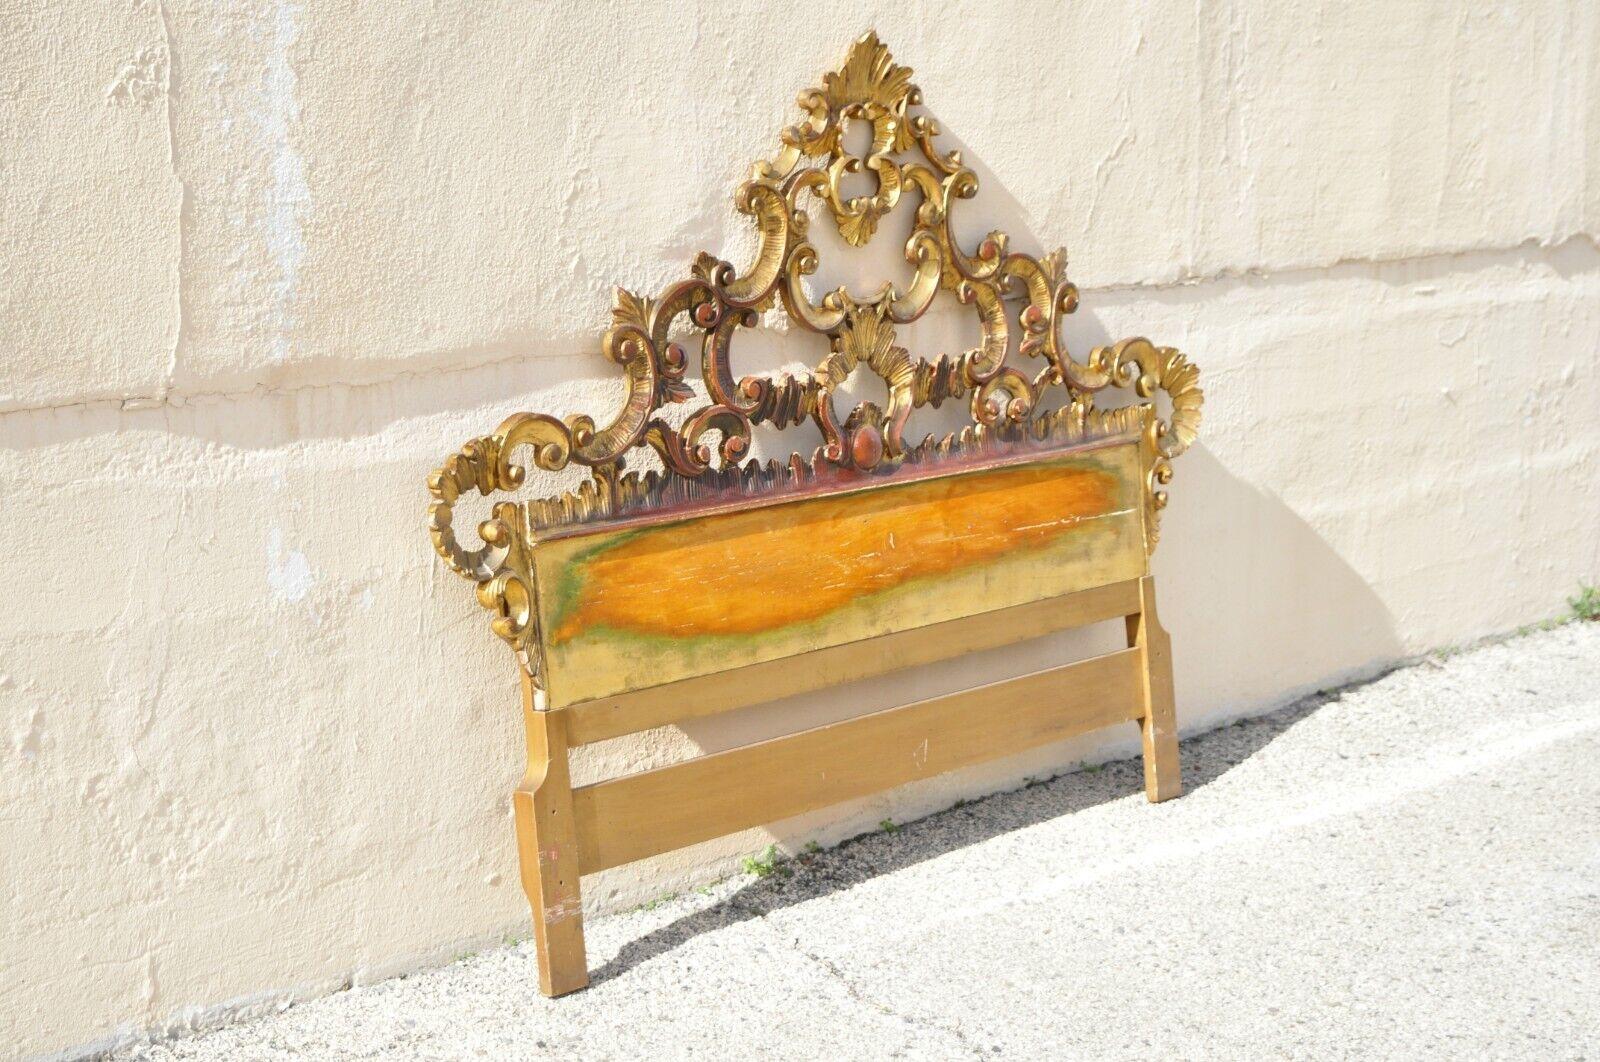 Vintage French Rococo Italian Hollywood Regency gold gilt wood queen sz headboard. Item featured is Queen size, gold gilt distressed finish, ornate leafy scrollwork, very nice vintage item, great style and form. Circa early 20th century.